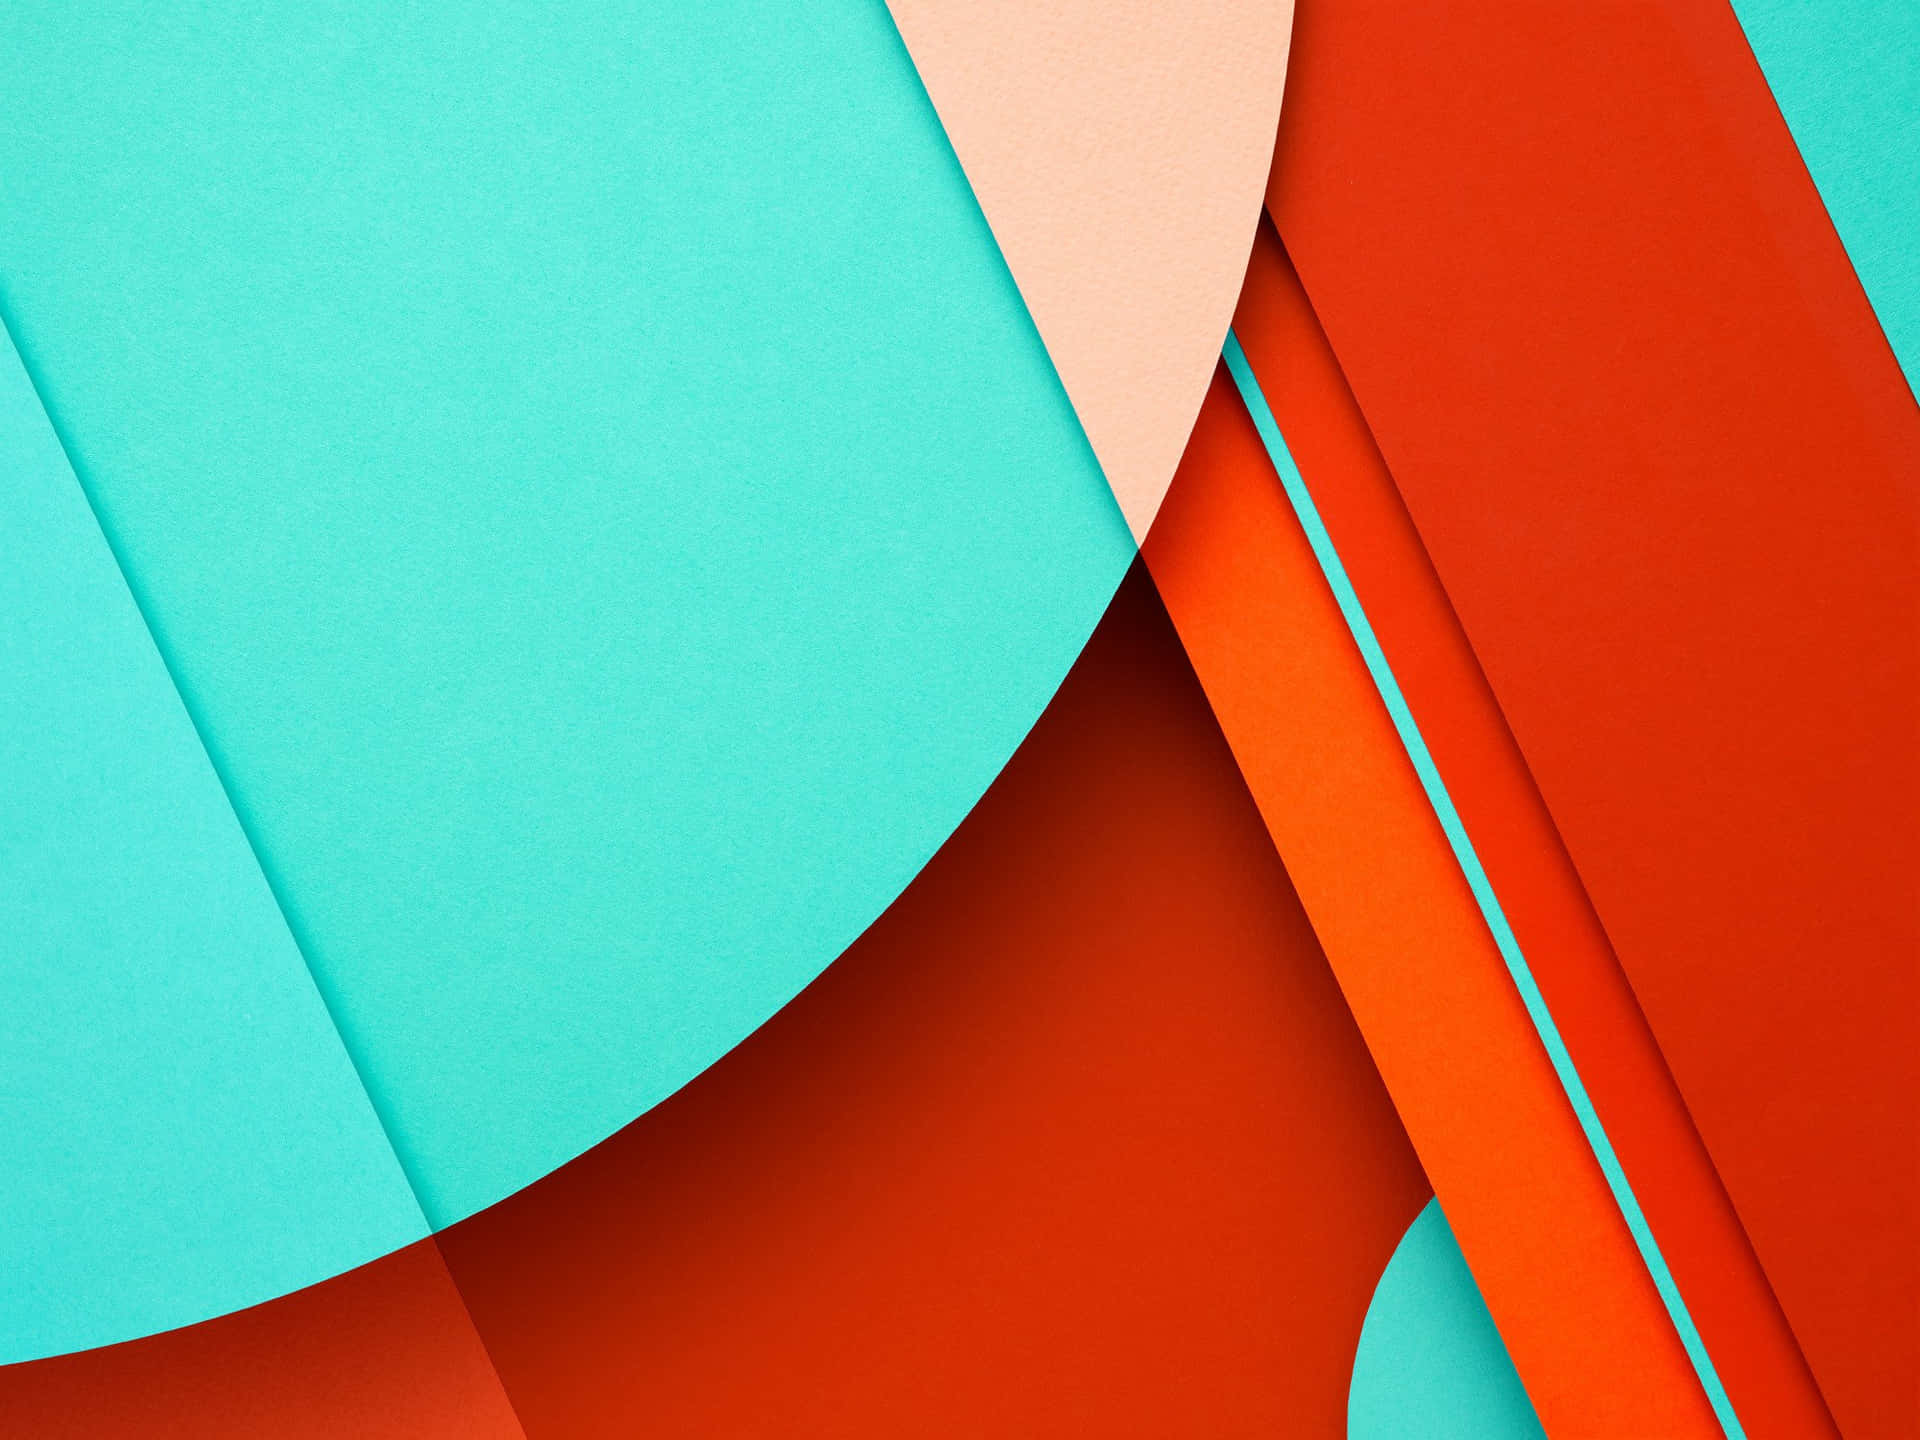 Google Material Design Concept Showcasing Colorful Layers That Change As You Navigate Around.